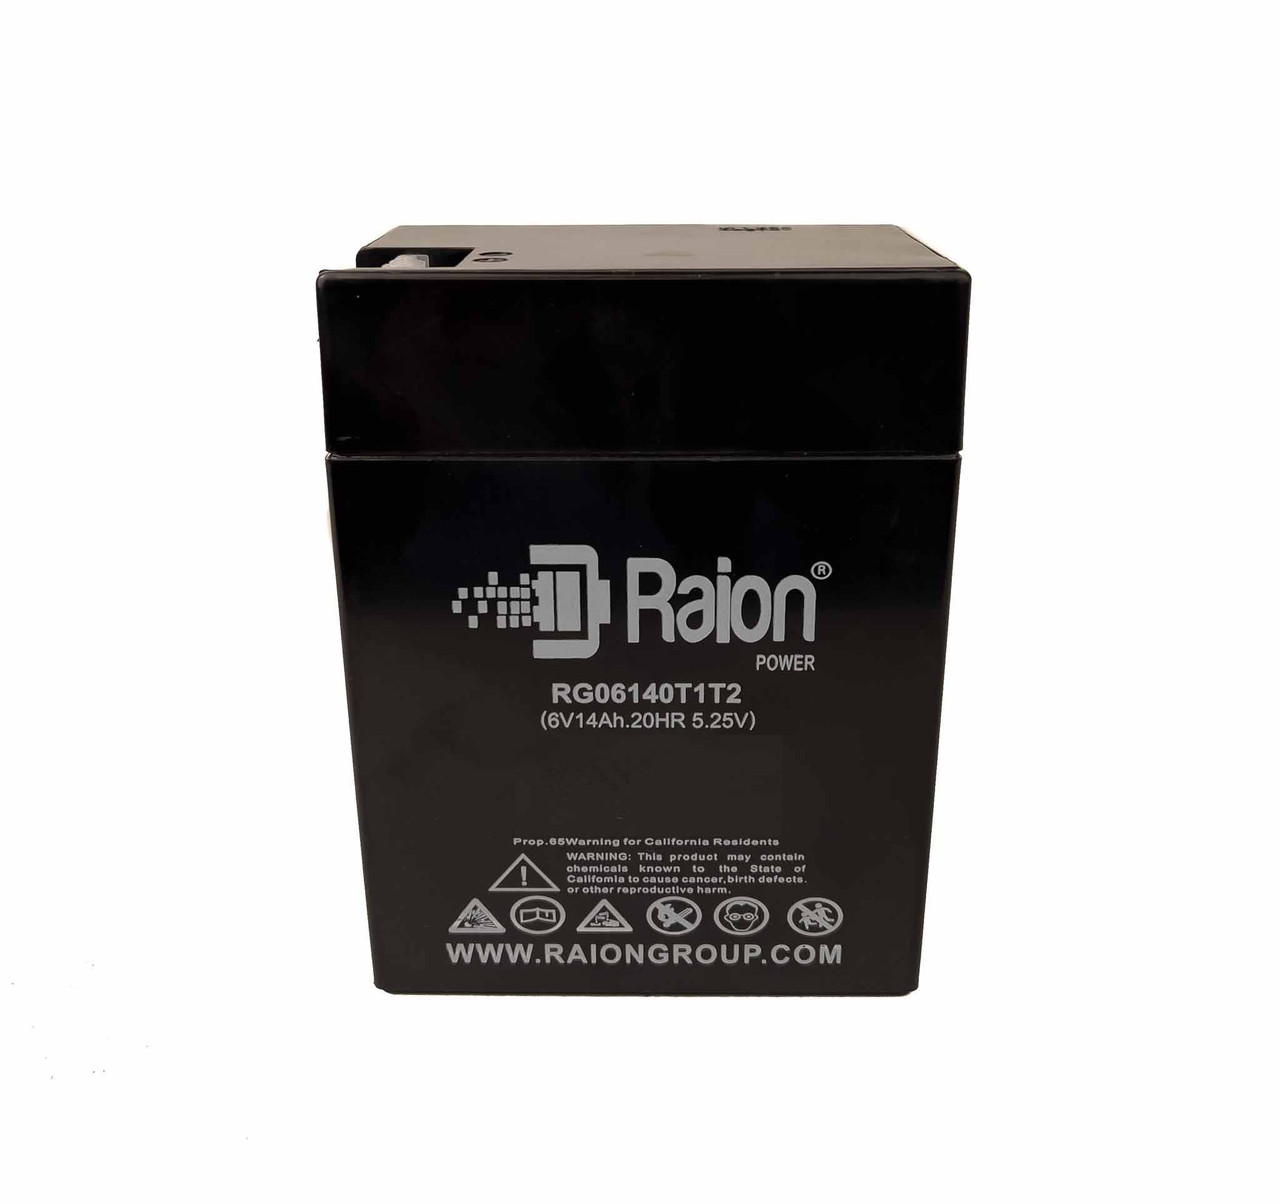 Raion Power RG06140T1T2 6V 14Ah Replacement T1T2 Battery Terminals for Hawk 74537-9993